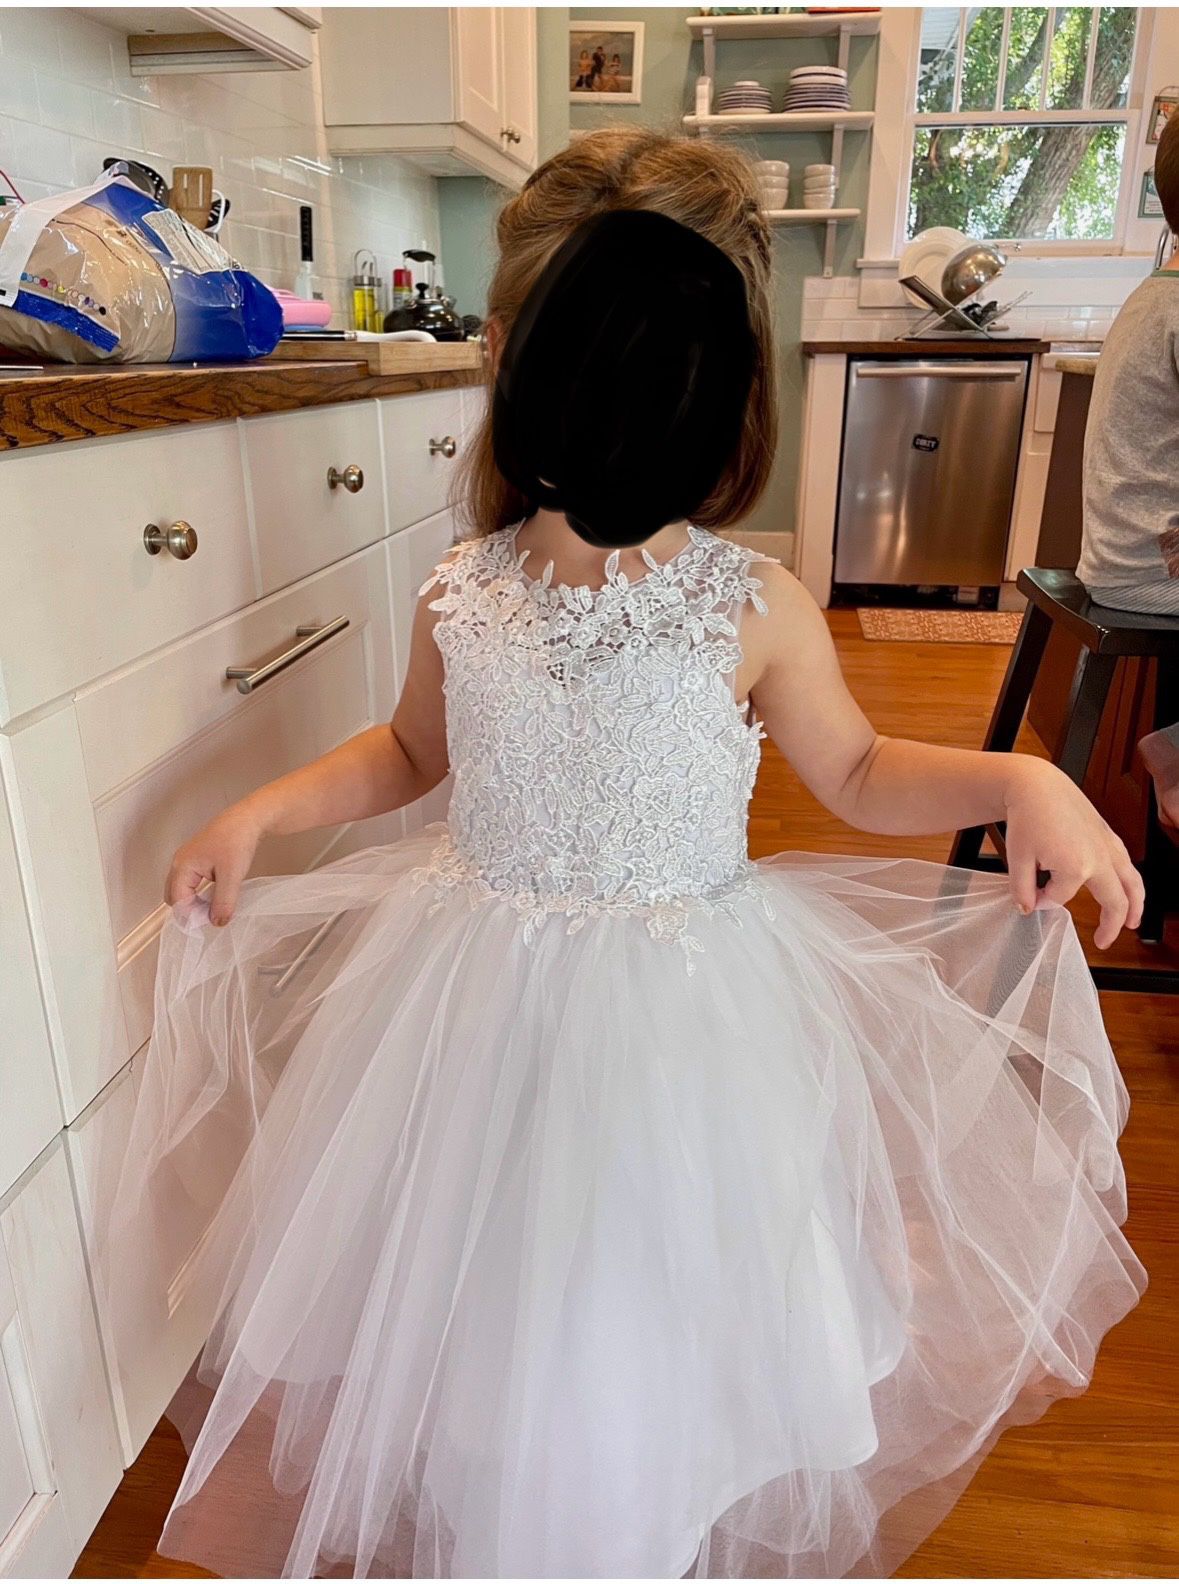 White Lace & Tulle Flower Girl Dress Size 5-6T - Like New, Worn Once